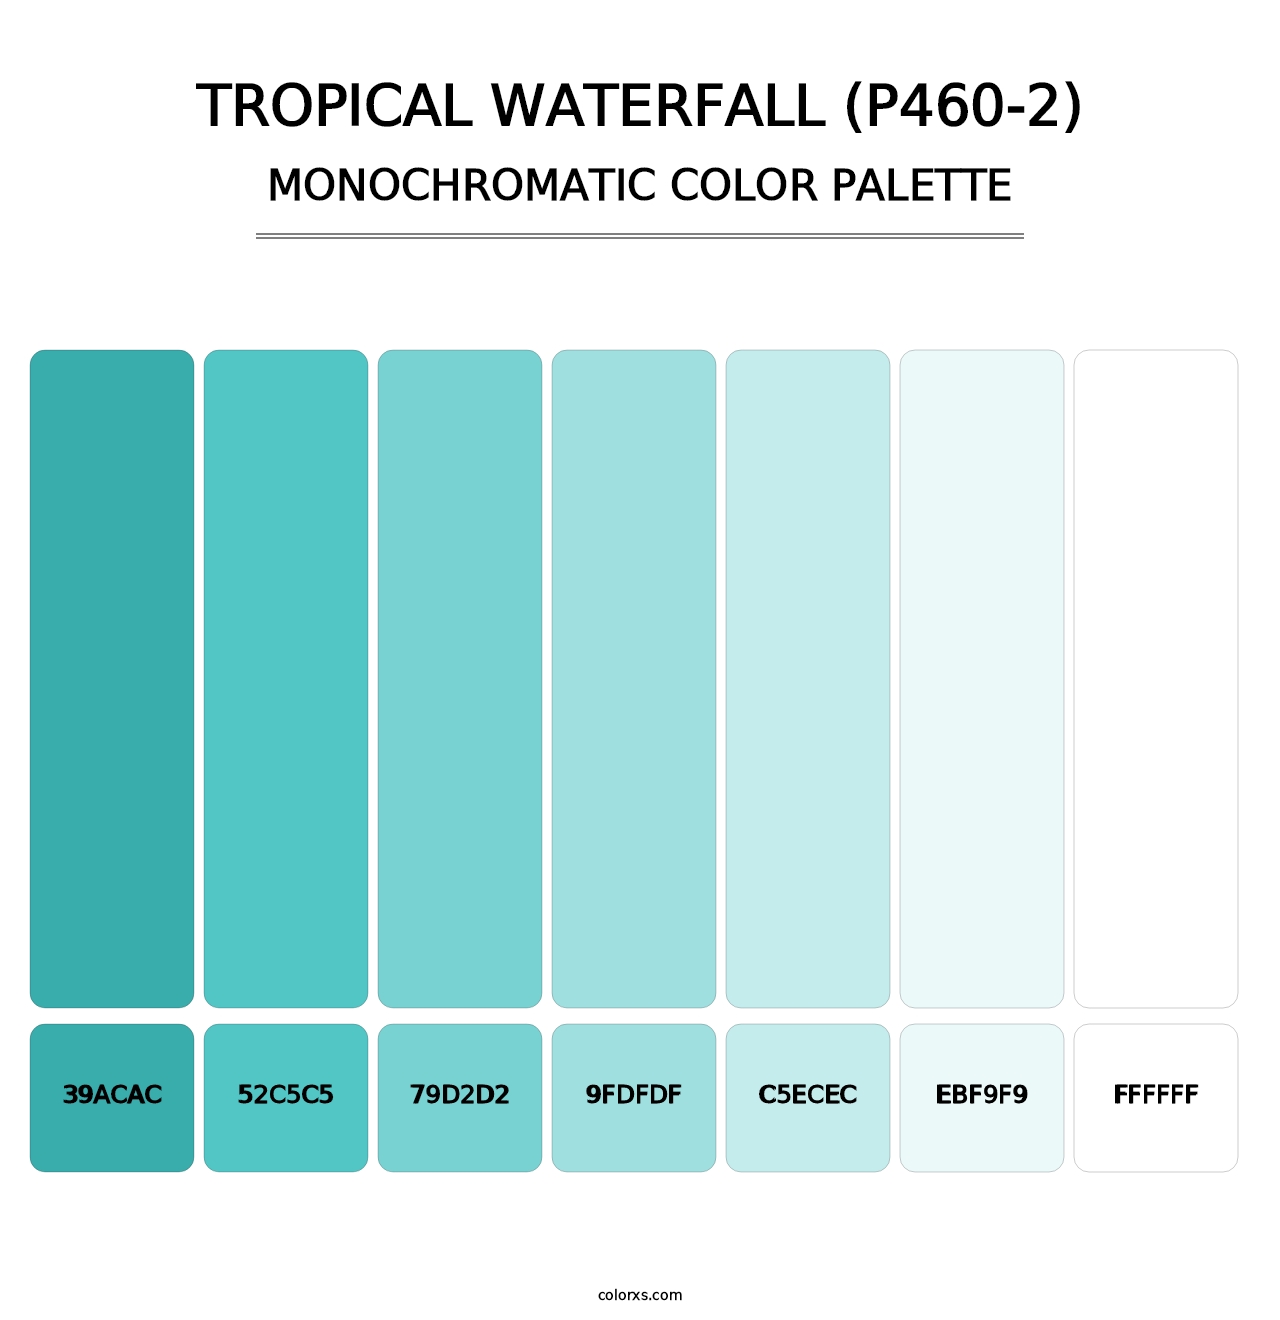 Tropical Waterfall (P460-2) - Monochromatic Color Palette